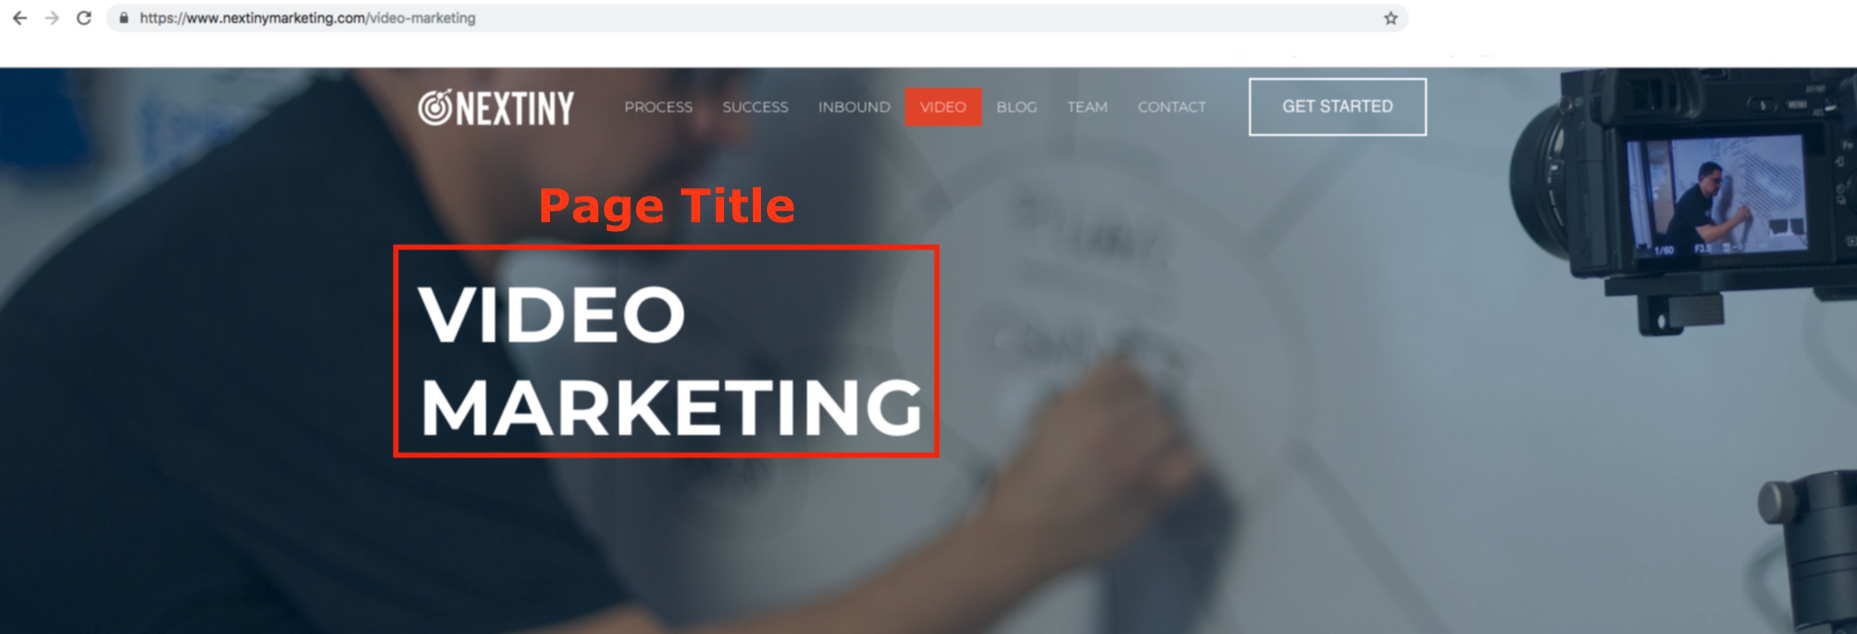 Onsite SEO - Page Titles